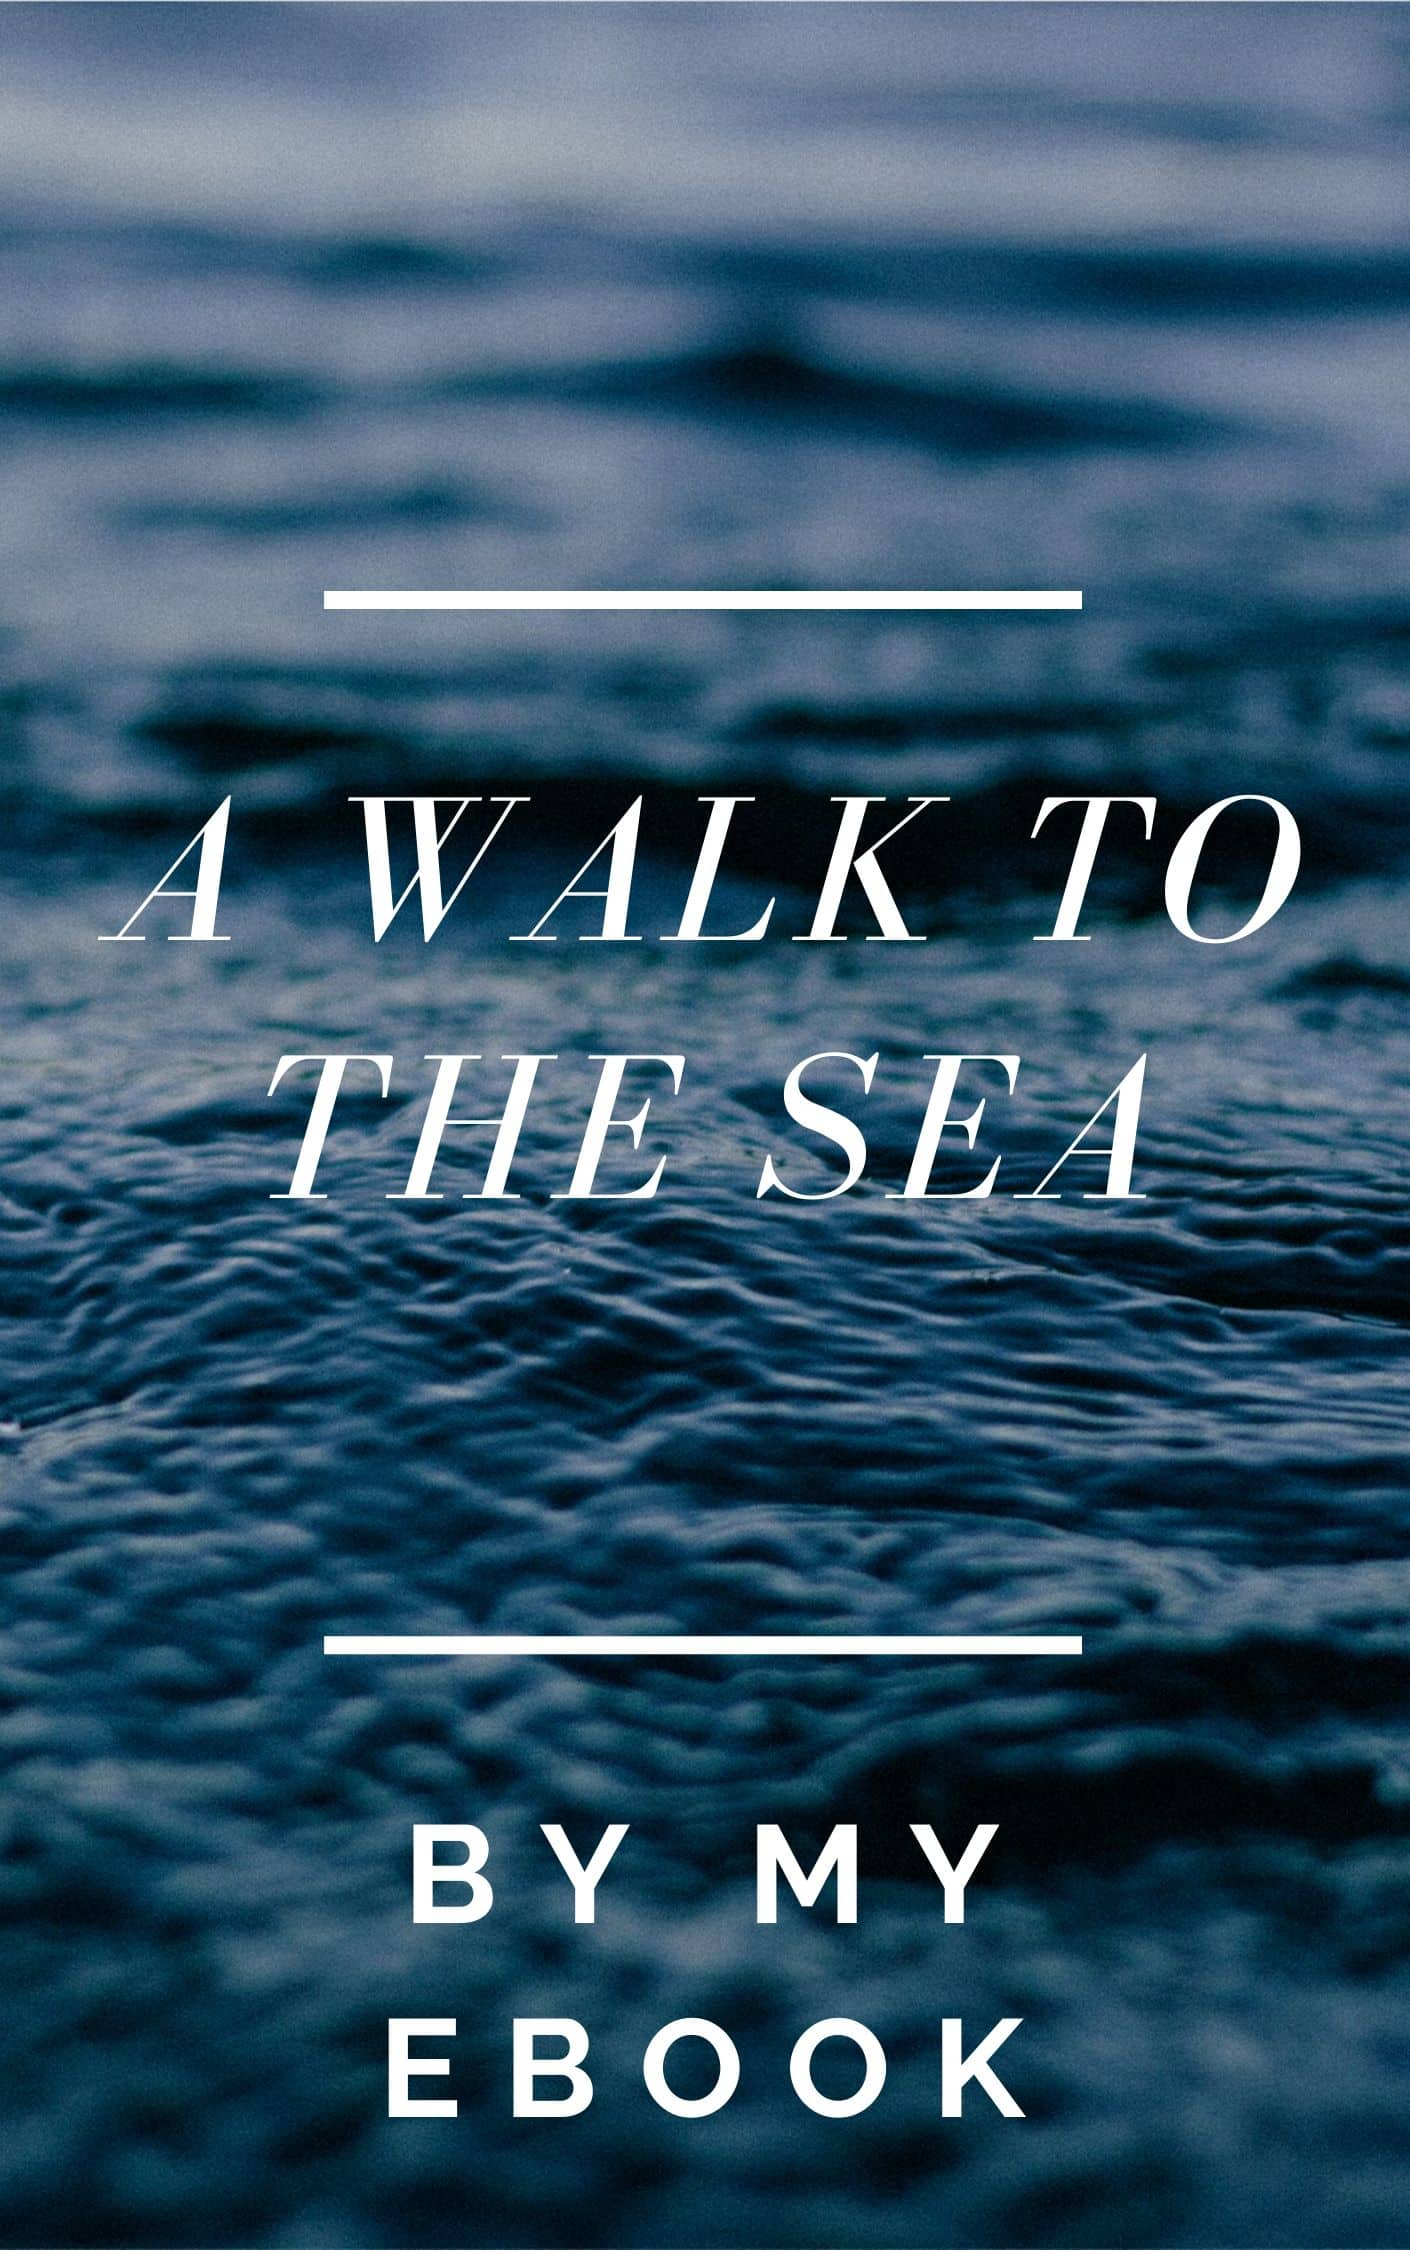 A Walk to The Sea